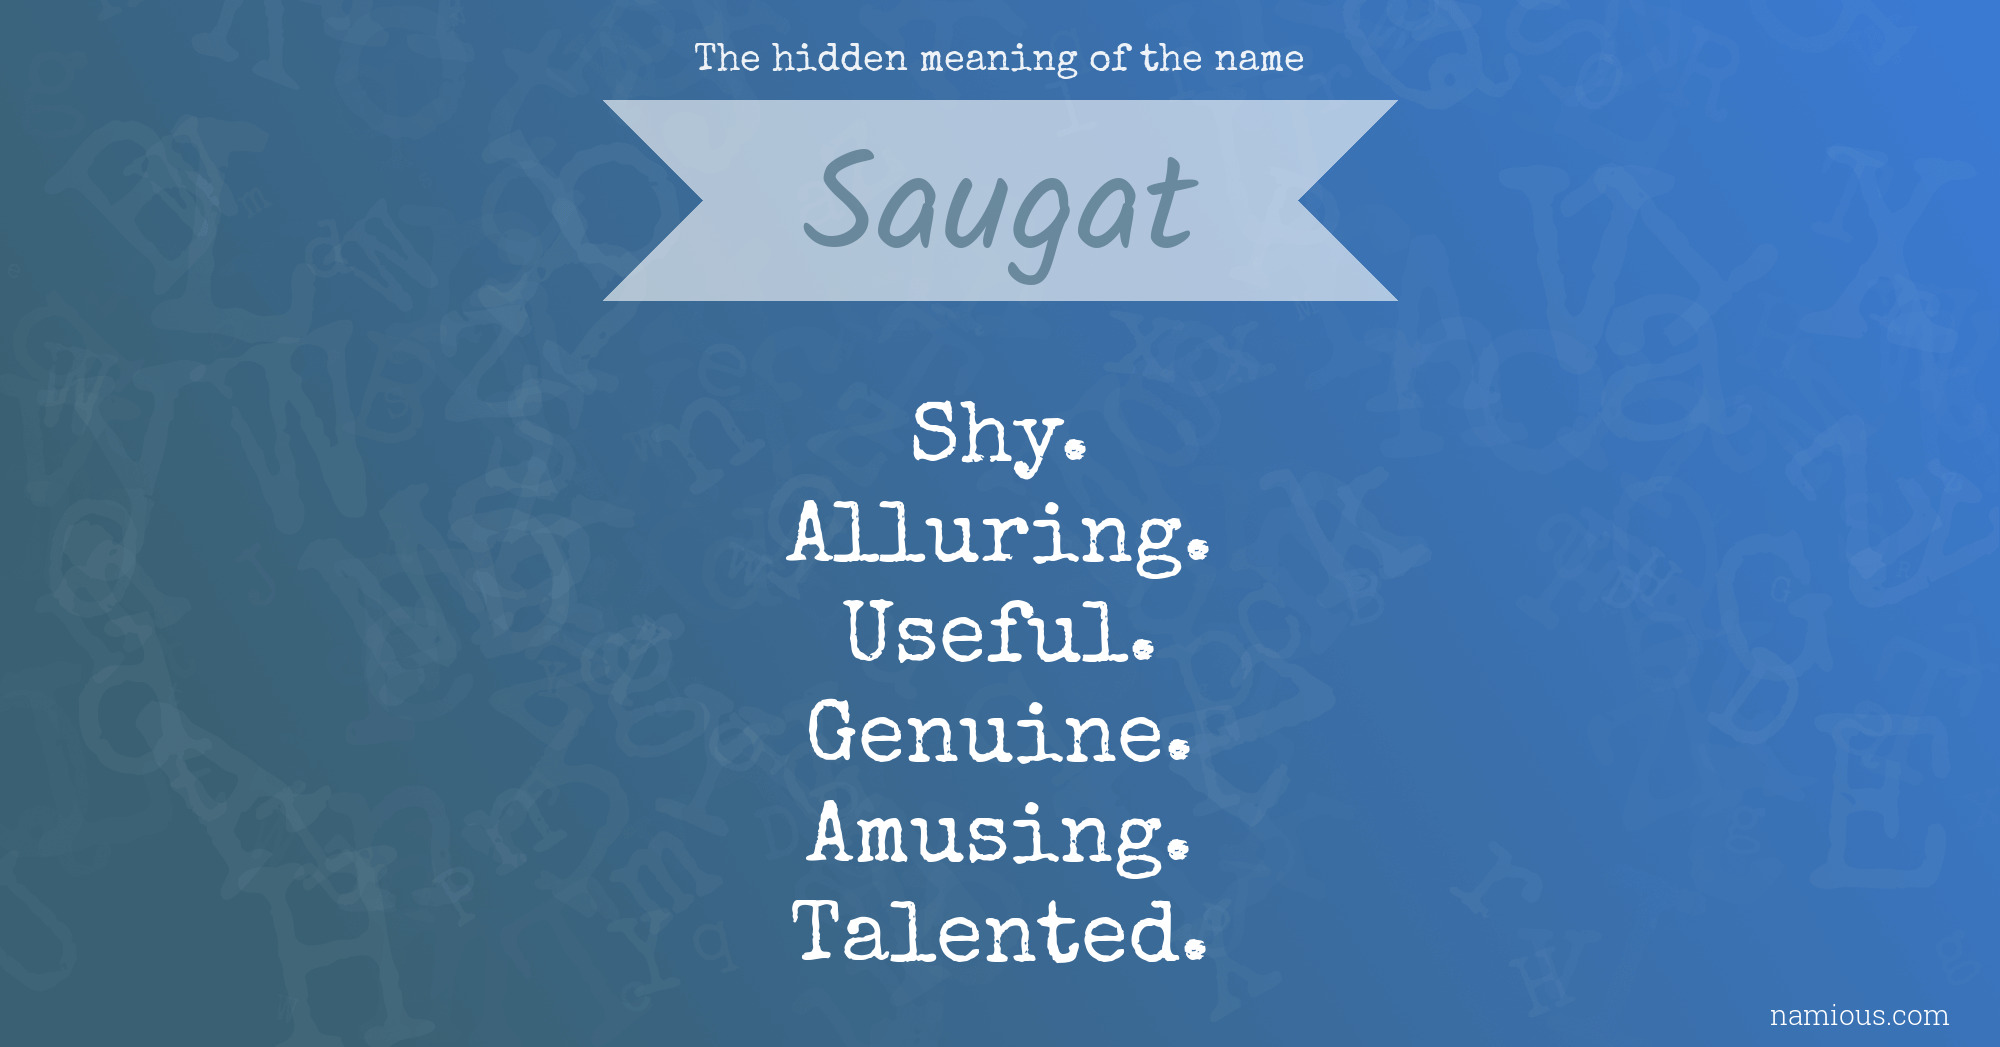 The hidden meaning of the name Saugat